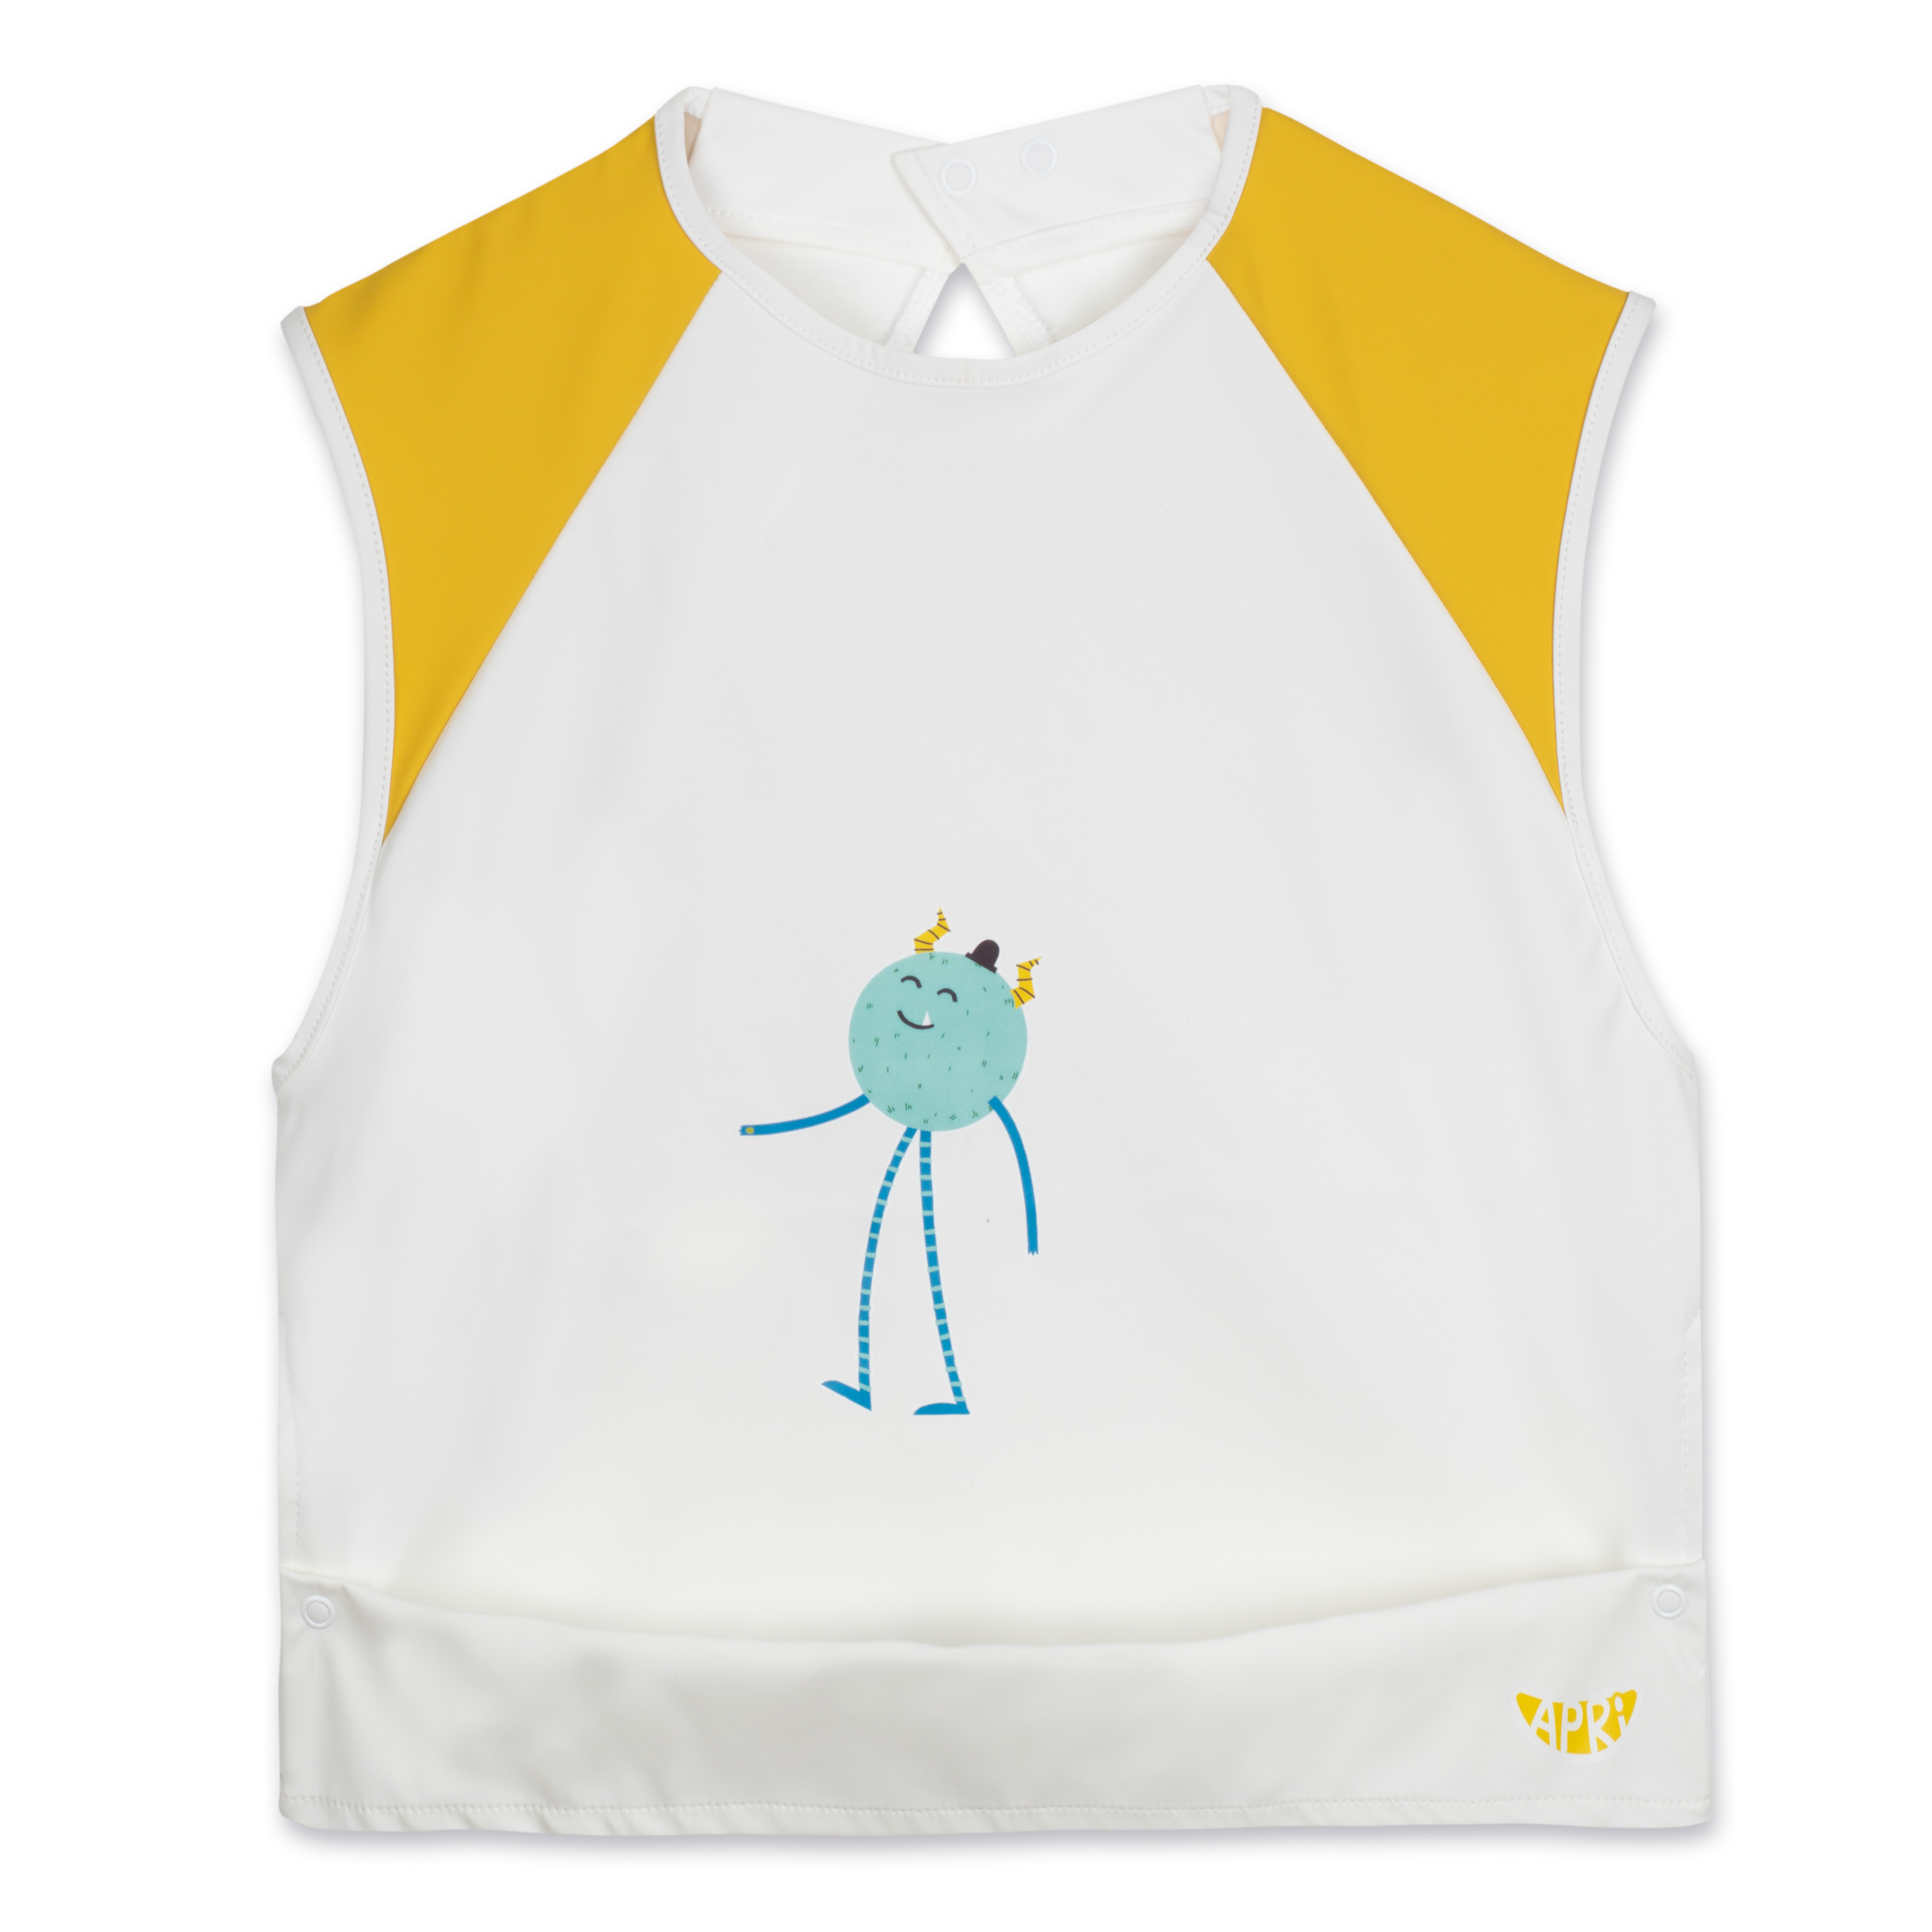 Short Sleeves, white with yellow, character in light blue